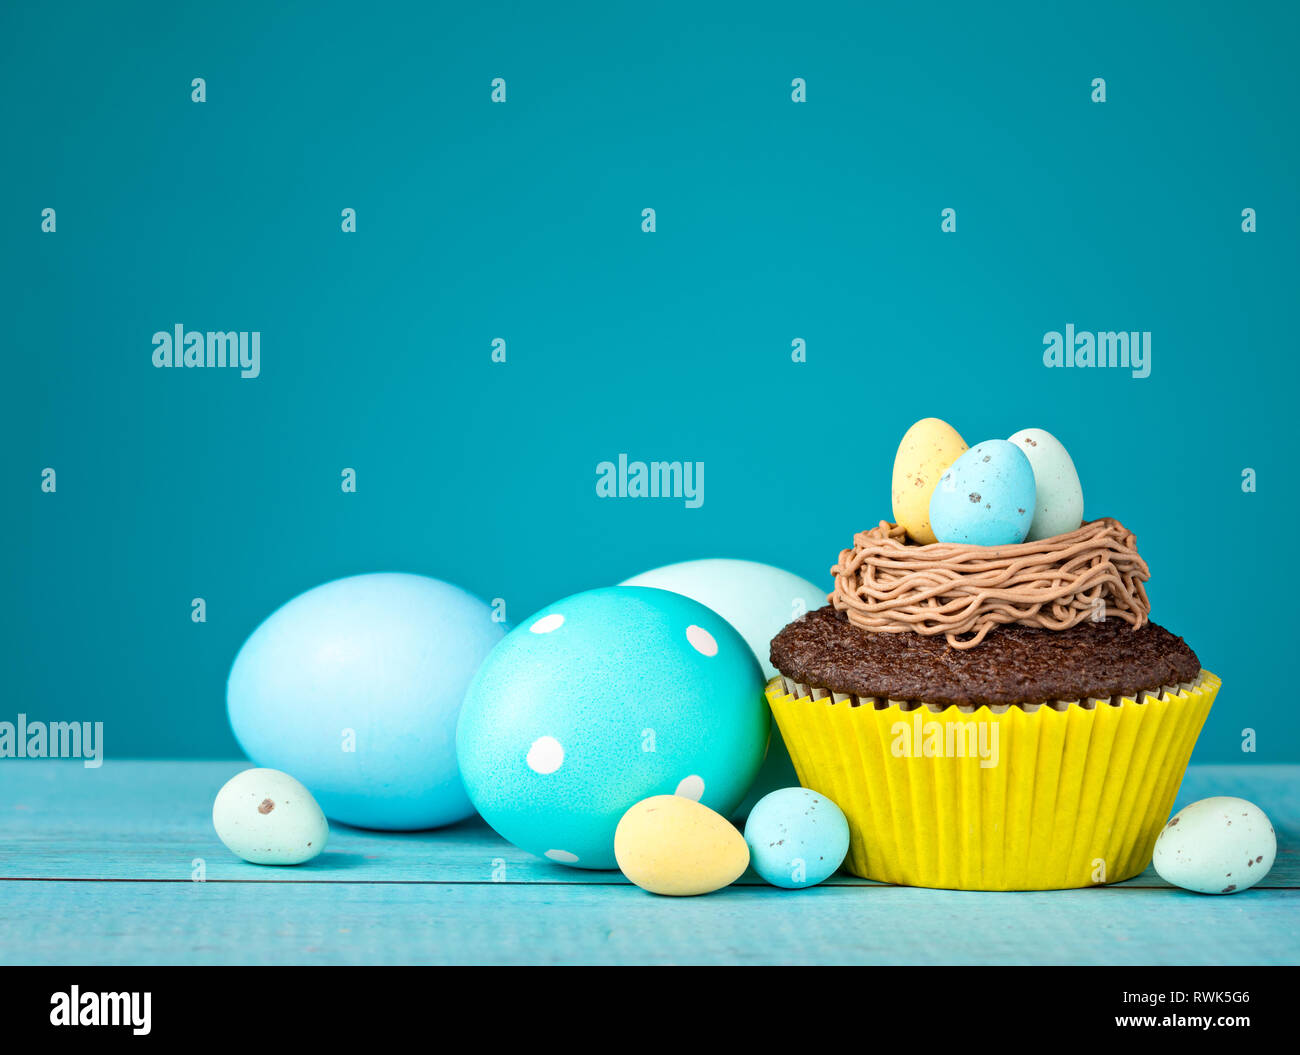 decorated Easter eggs and cupcake with Candy on a blue background. Stock Photo